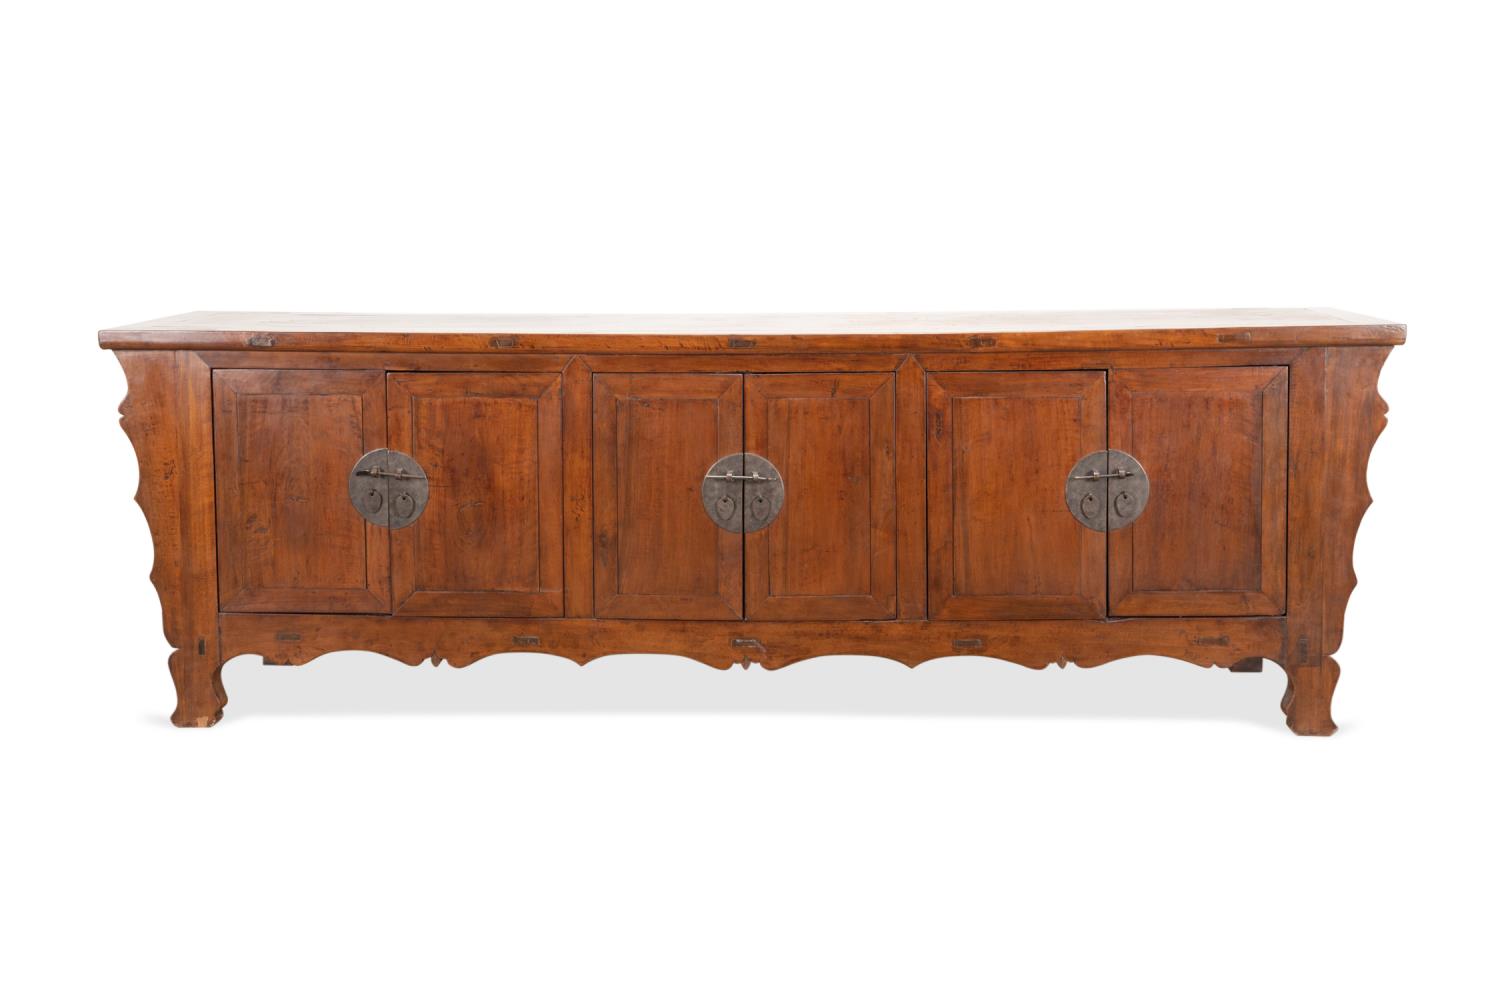 LONG CHINESE CARVED WOOD SIDEBOARD 2fa2c3